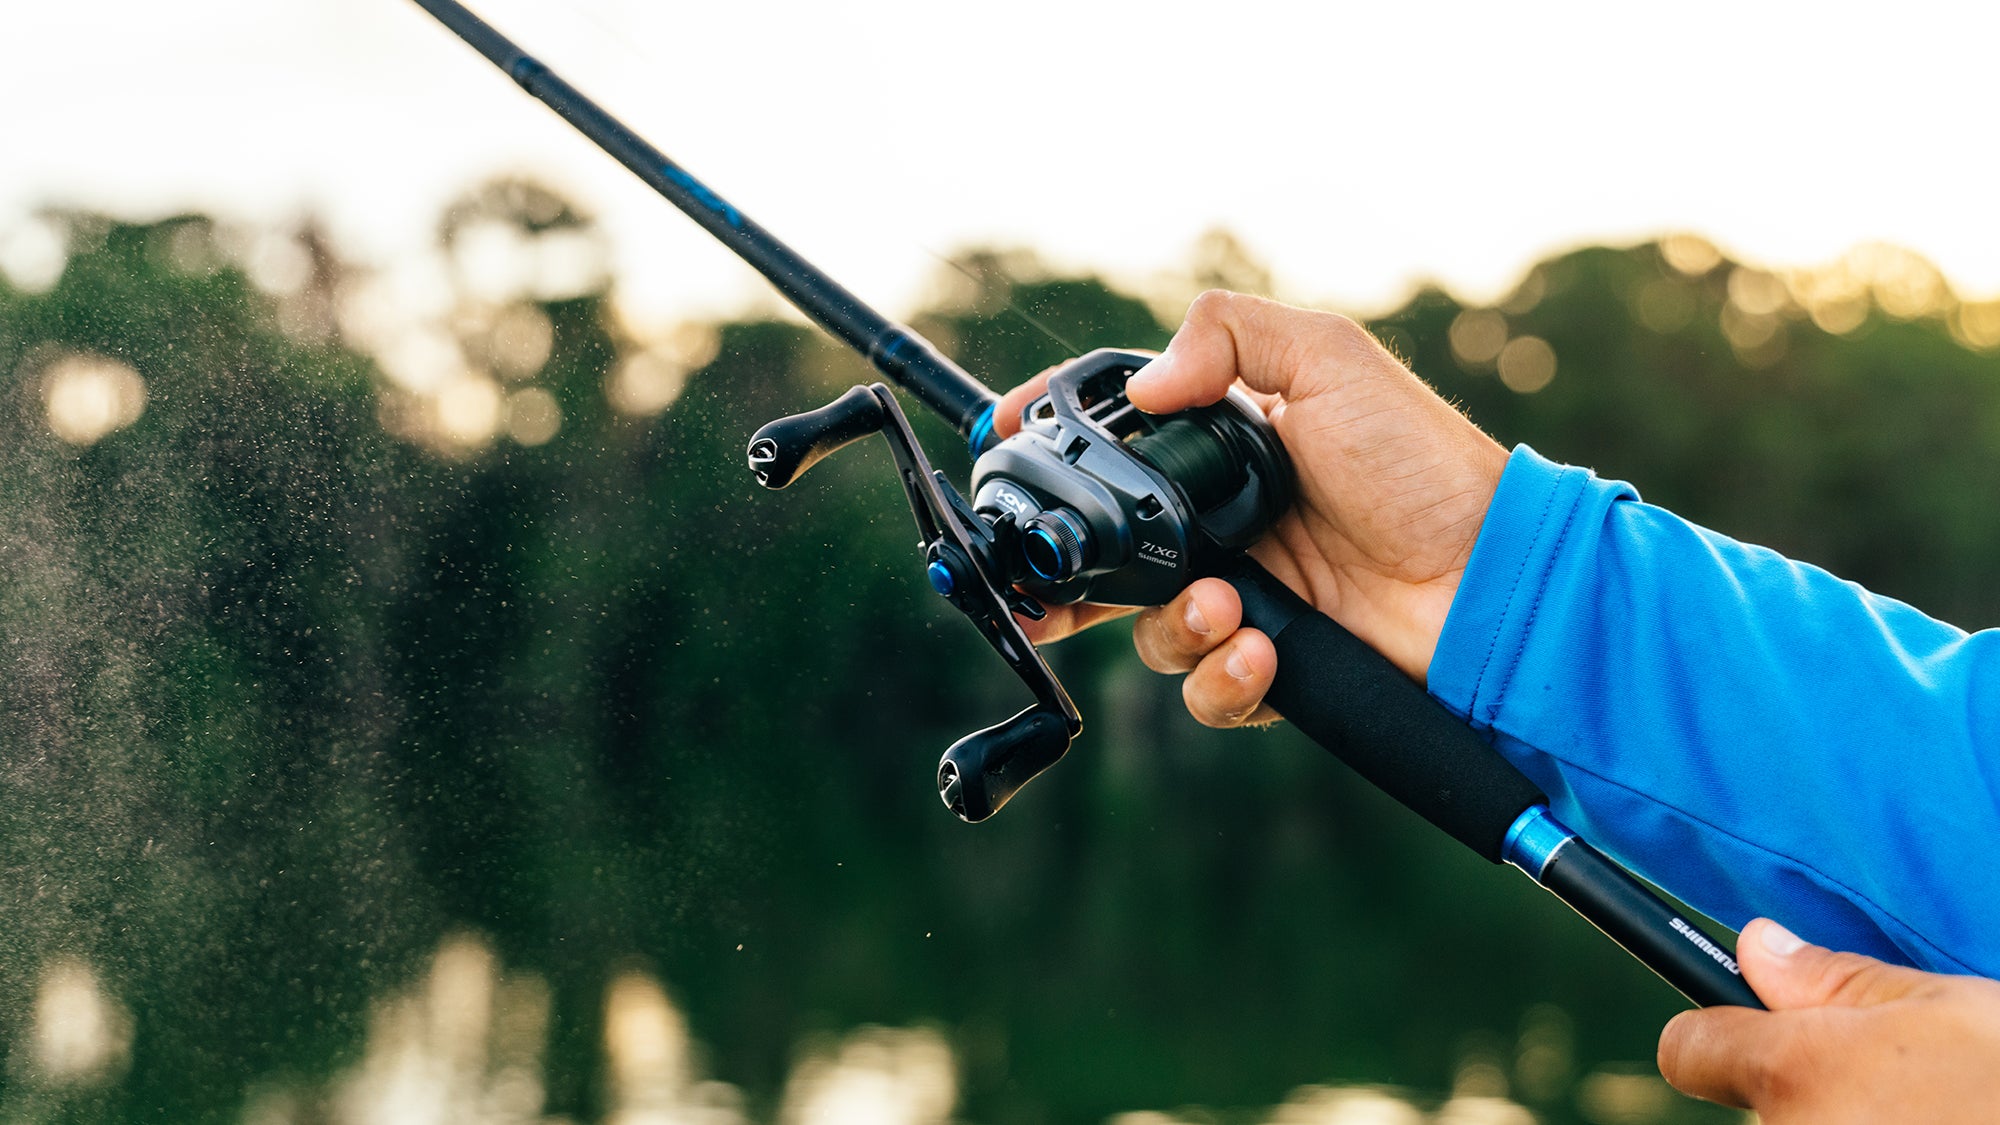 How To Set-Up a Baitcasting Reel: Easy Step-by Step Instructions